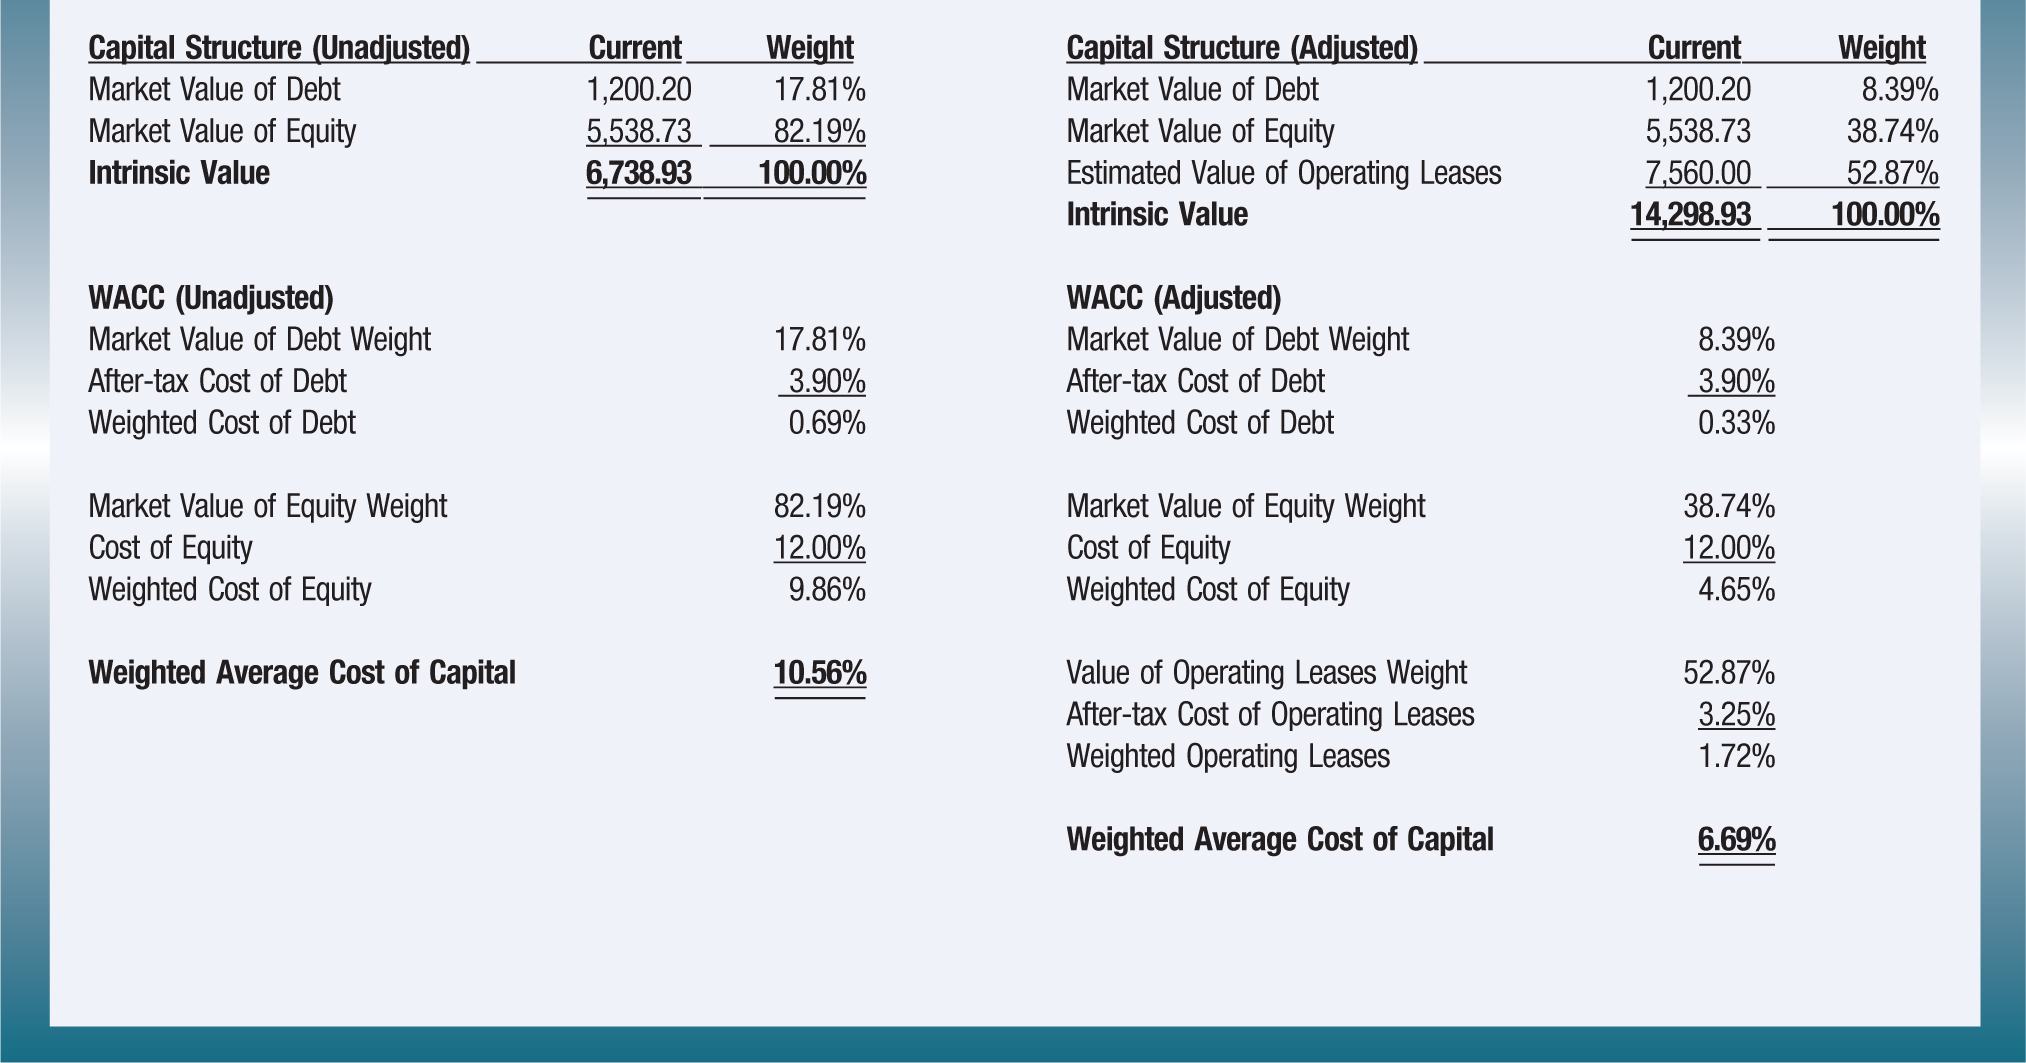 Capital Structure (Unadjusted); Current; Weight; Capital Structure (Adjusted); Current; Weight Market Value of Debt; 1,200.20; 17.81%; Market Value of Debt; 1,200.20; 8.39% Market Value of Equity; 5,538.73; 82.19%; Market Value of Equity; 5,538.73; 38.74% Intrinsic Value; 6,738.93; 100.00%; Estimated Value of Operating Leases; 7,560.00; 52.87% Intrinsic Value; 14,298.93; 100.00% WACC (Unadjusted); WACC (Adjusted) Market Value of Debt Weight; 17.81%; Market Value of Debt Weight; 8.39% After-tax Cost of Debt; 3.90%; After-tax Cost of Debt; 3.90% Weighted Cost of Debt; 0.69%; Weighted Cost of Debt; 0.33% Market Value of Equity Weight; 82.19%; Market Value of Equity Weight; 38.74% Cost of Equity; 12.00%; Cost of Equity; 12.00% Weighted Cost of Equity; 9.86%; Weighted Cost of Equity; 4.65% Weighted Average Cost of Capital; 10.56%; Value of Operating Leases Weight; 52.87% After-tax Cost of Operating Leases; 3.25% Weighted Operating Leases; 1.72% Weighted Average Cost of Capital; 6.69%